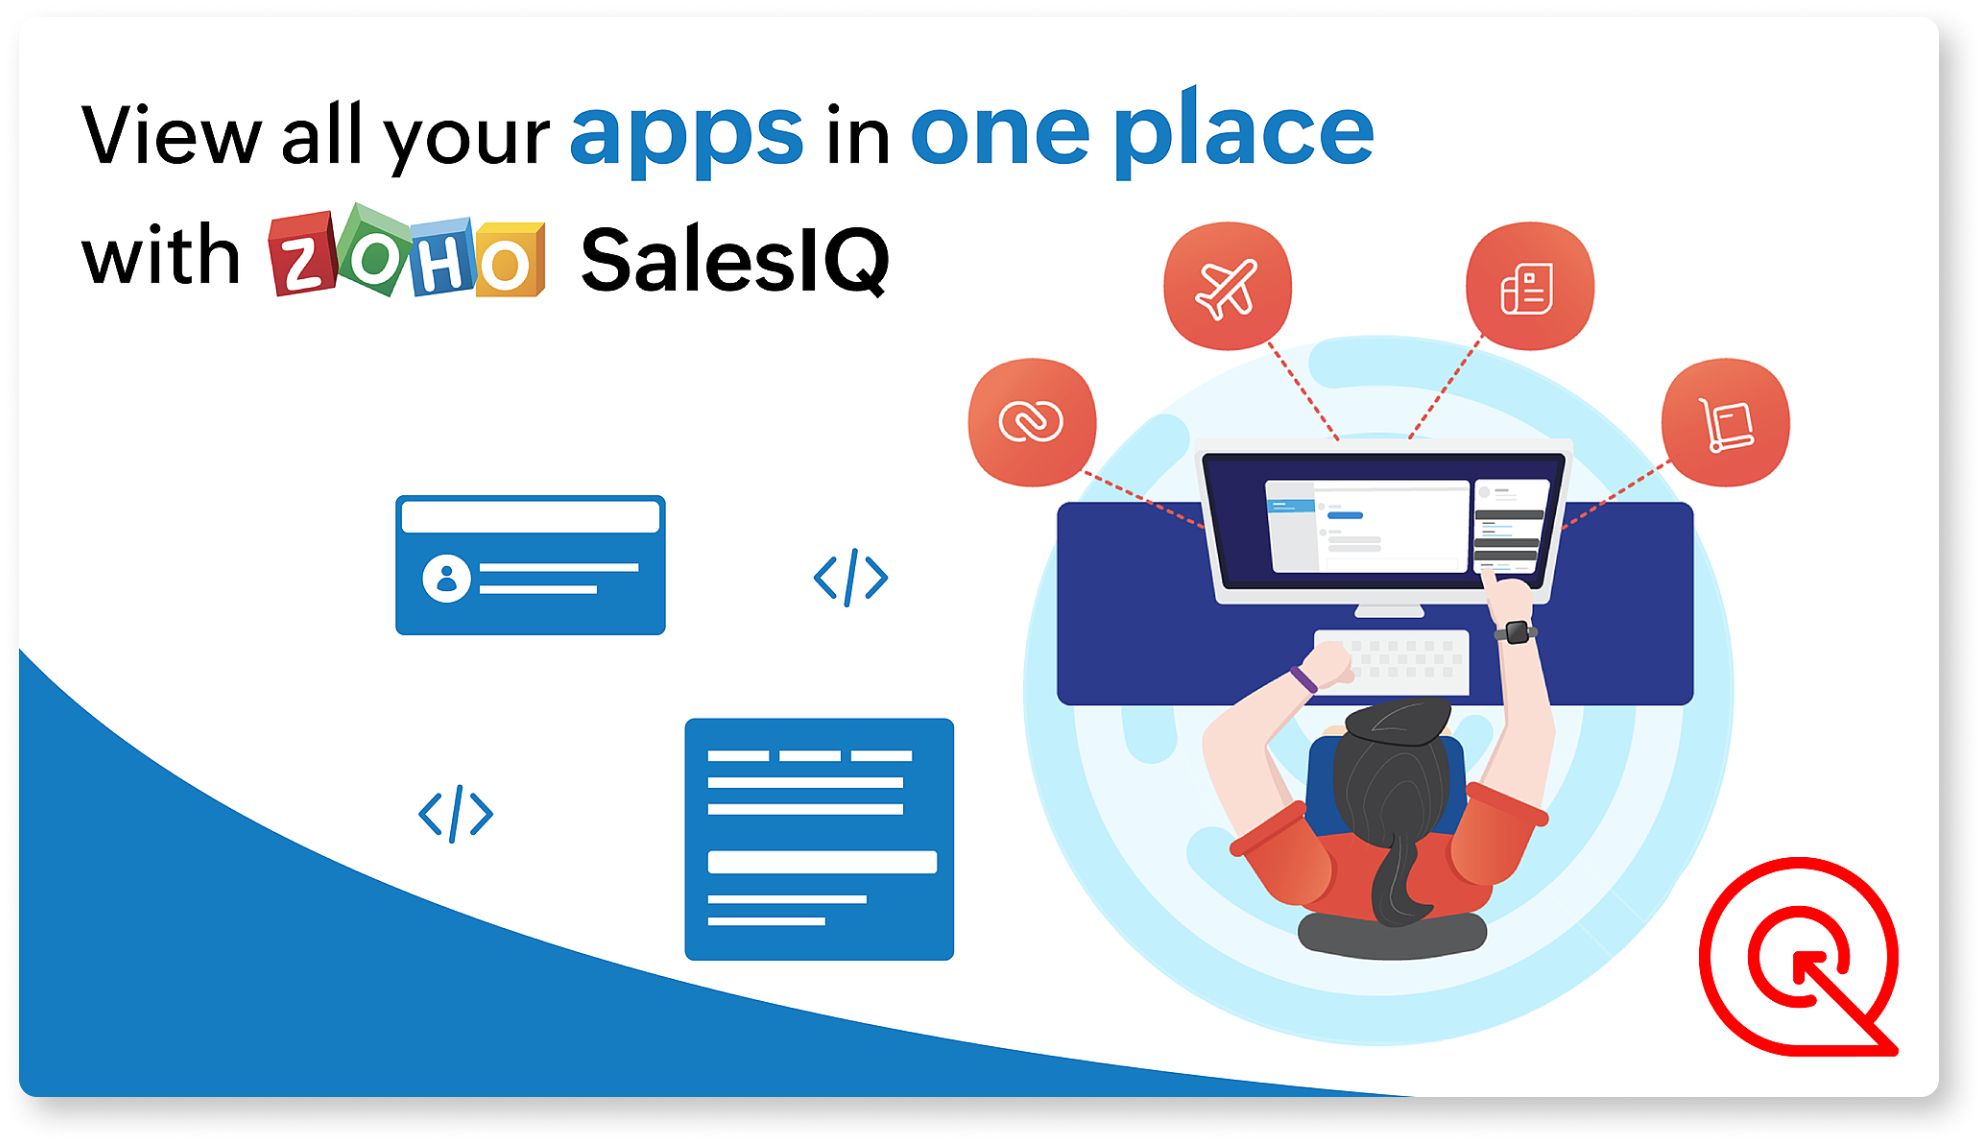 View all your apps in one place with Zoho SalesIQ